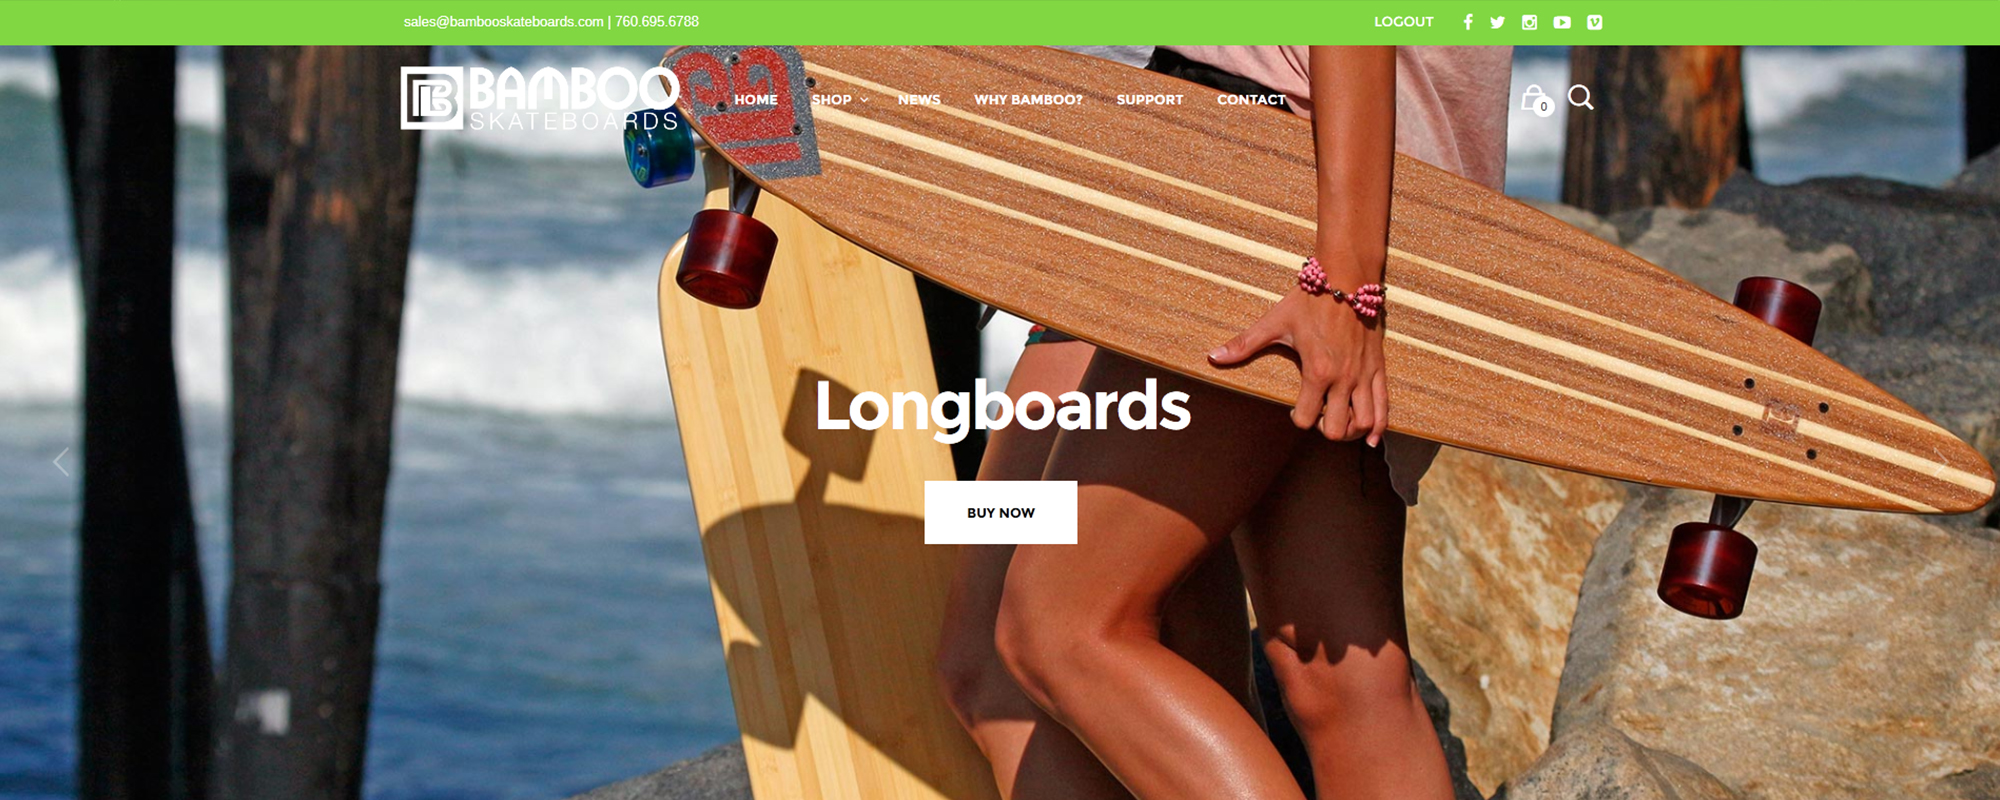 Bamboo Skateboards | <a href='//www.runningfish.net/'>See More Clients</a>